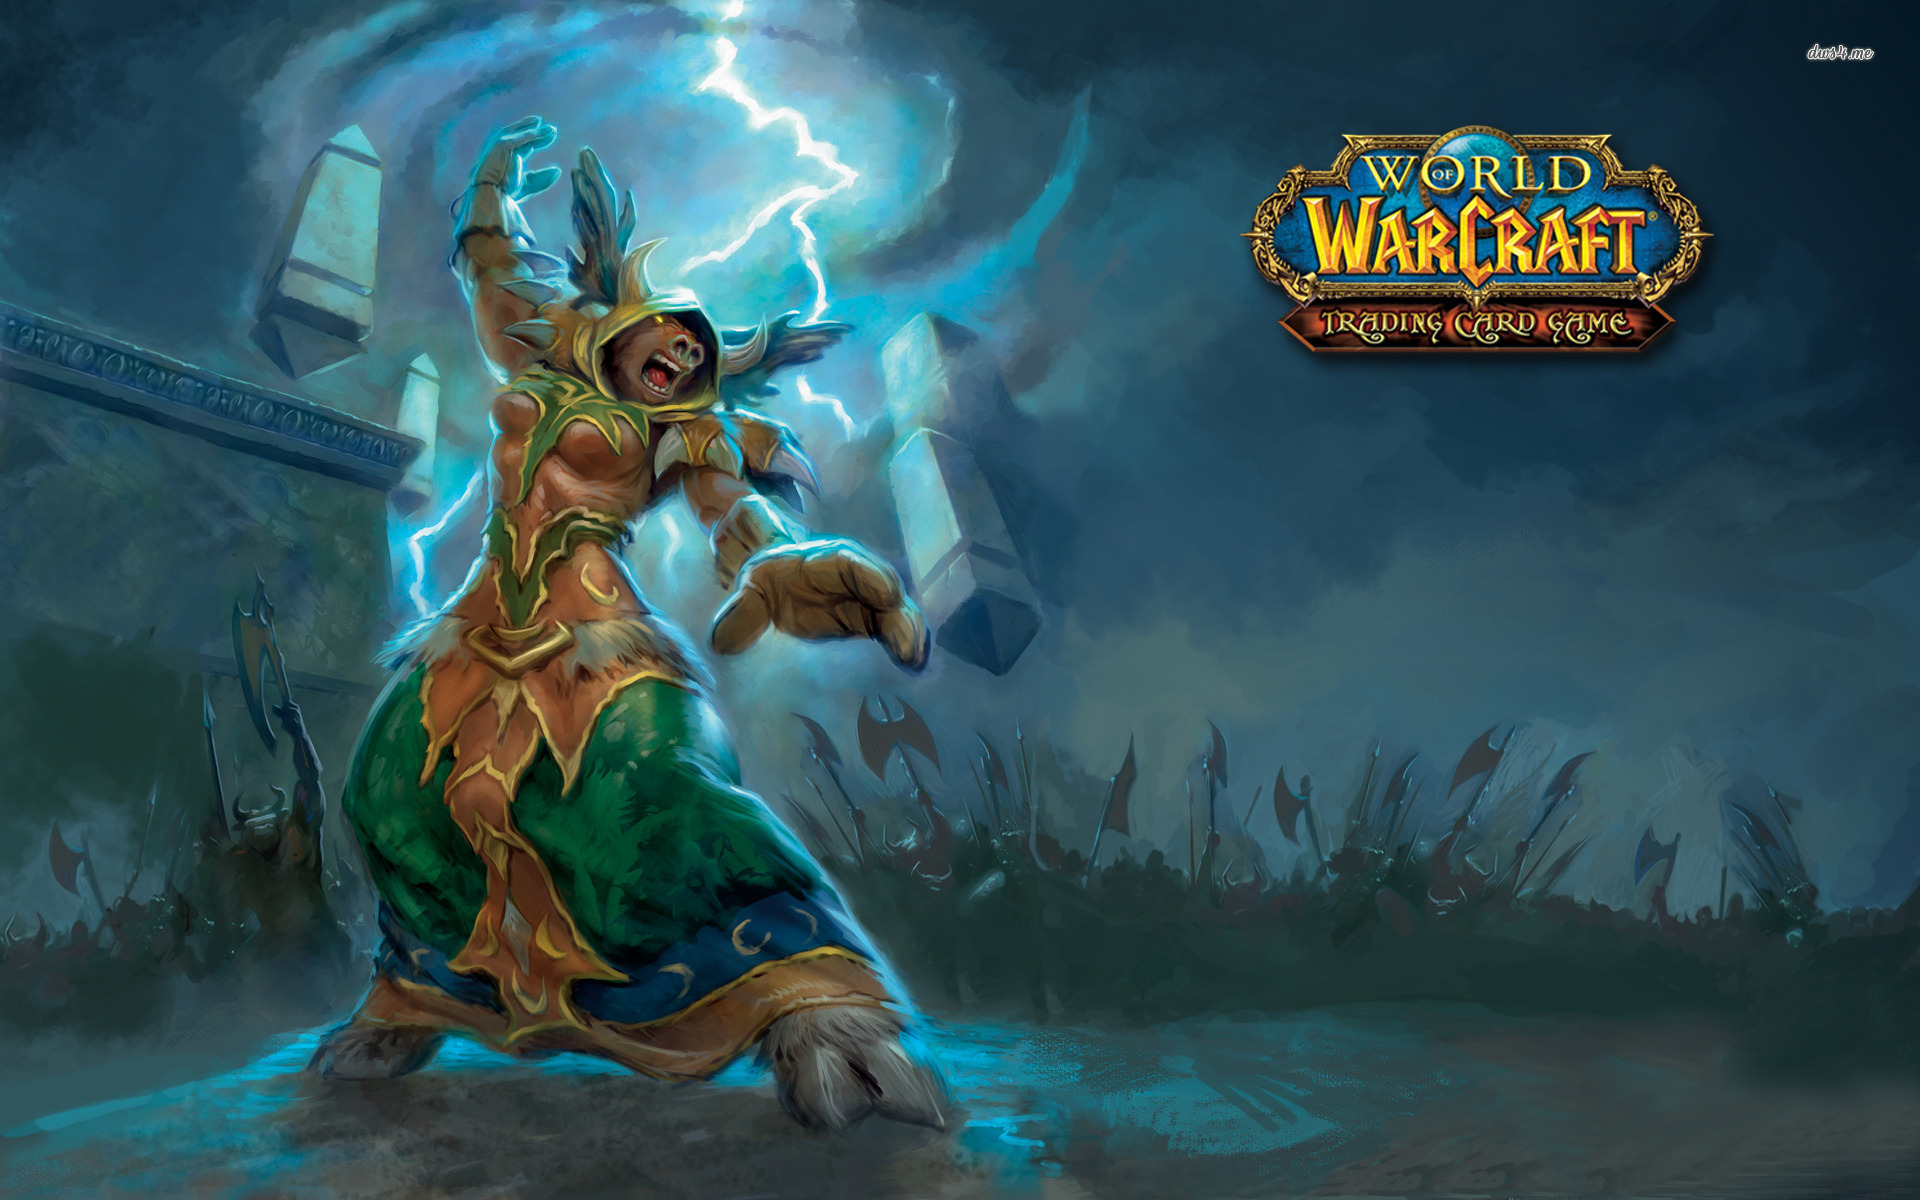 World Of Warcraft - Priest wallpaper - Game wallpapers -